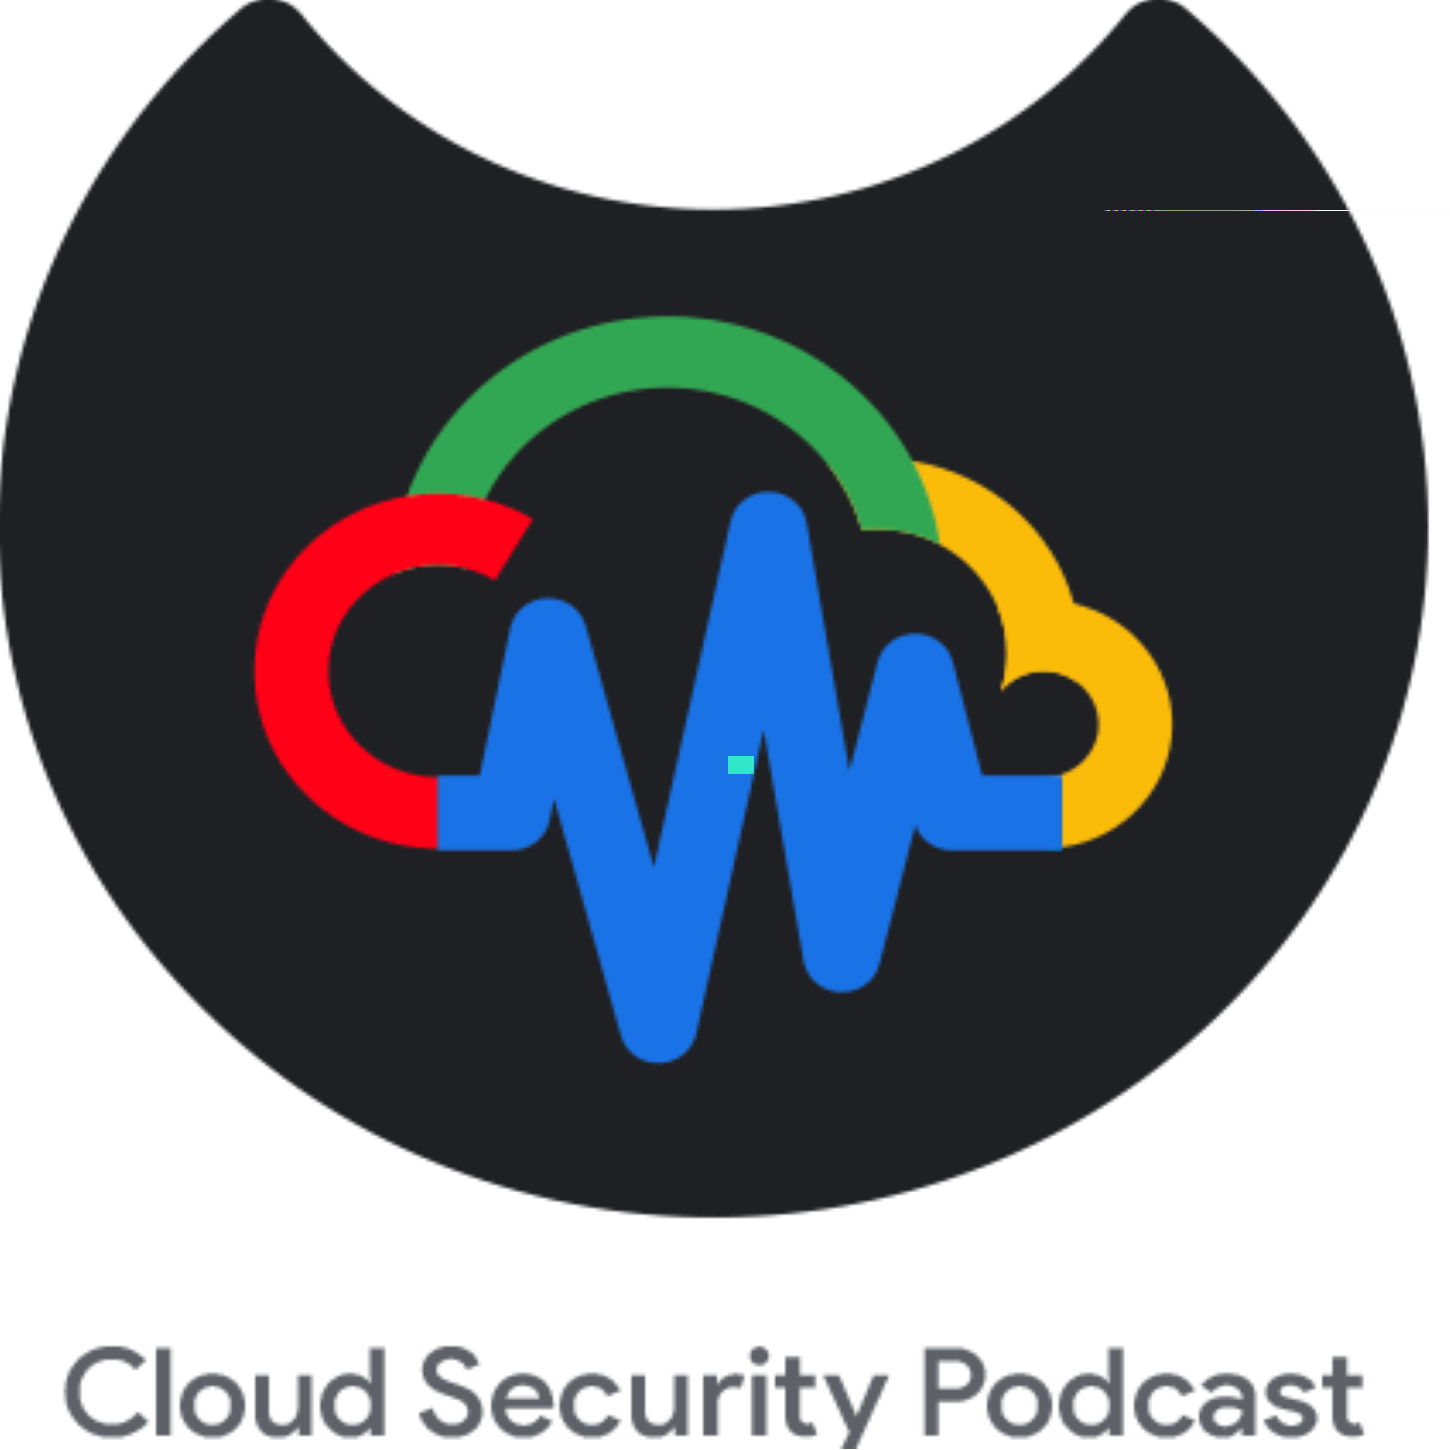 A highlight from EP102 Sunil Potti on Building Cloud Security at Google